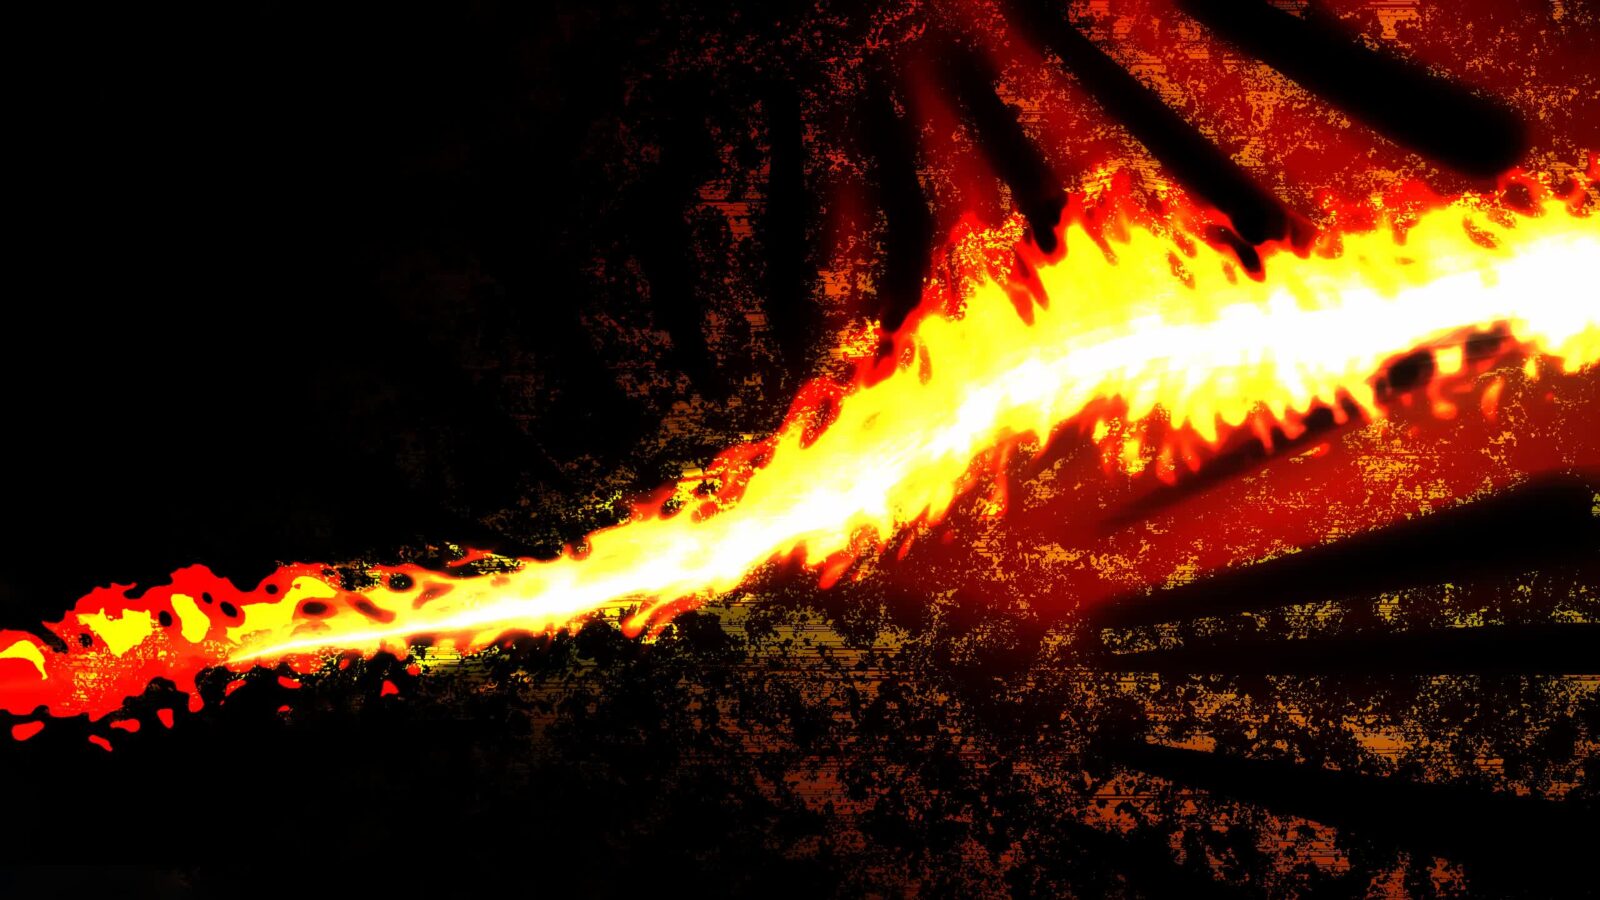 Abstract Fire Flame 2K Artwork - Free Live Wallpaper